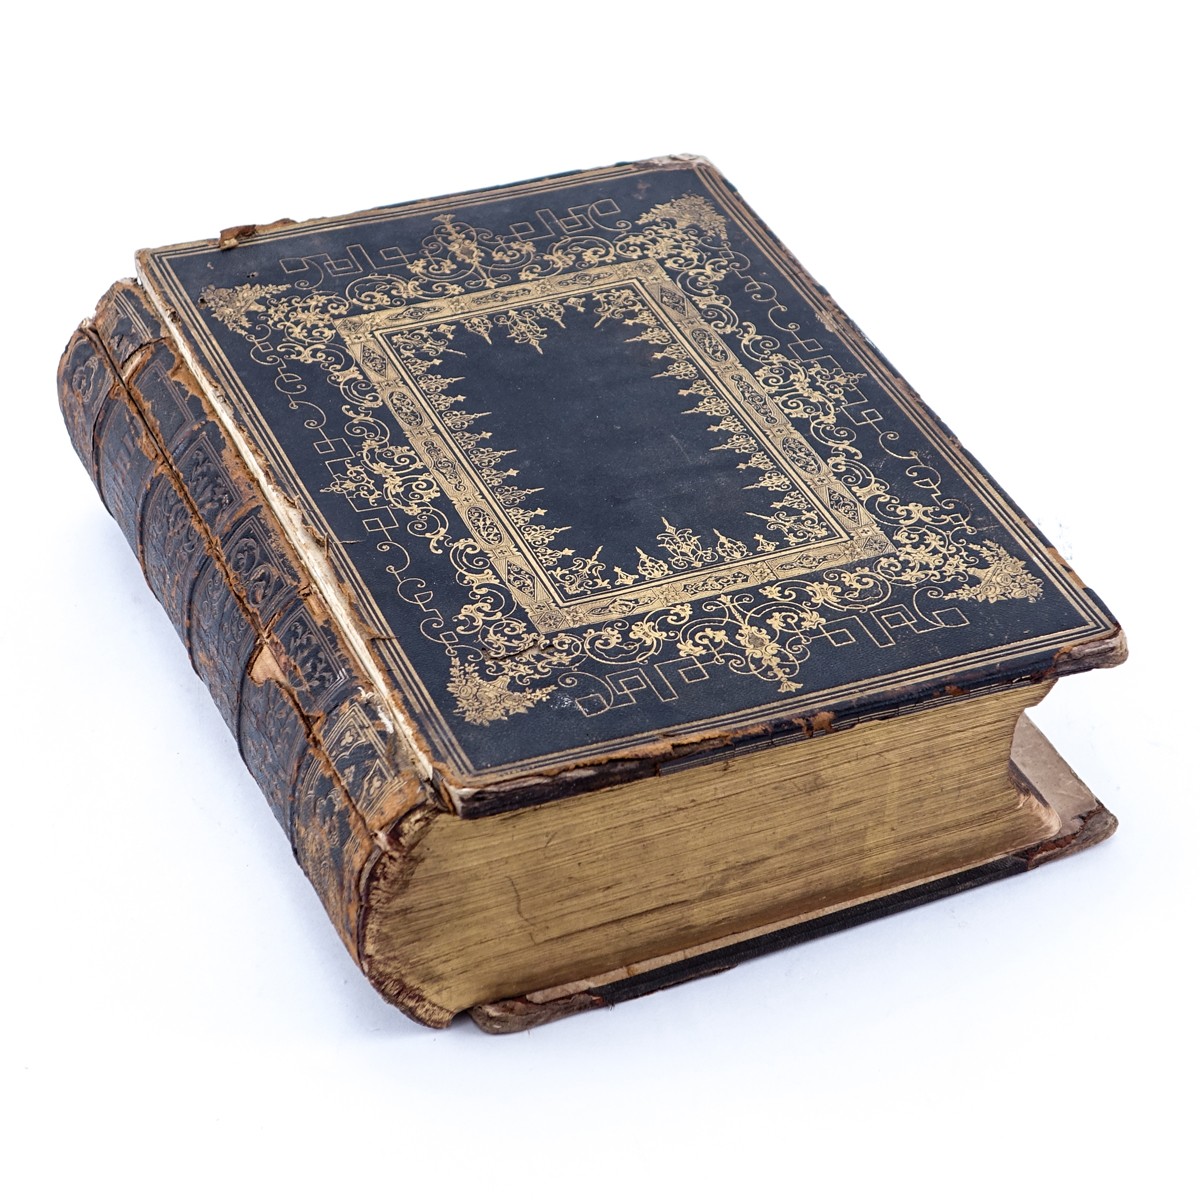 Harper and Brothers, Publishers, New York, 1846, Large Leather Bound Illuminated Bible. Includes th